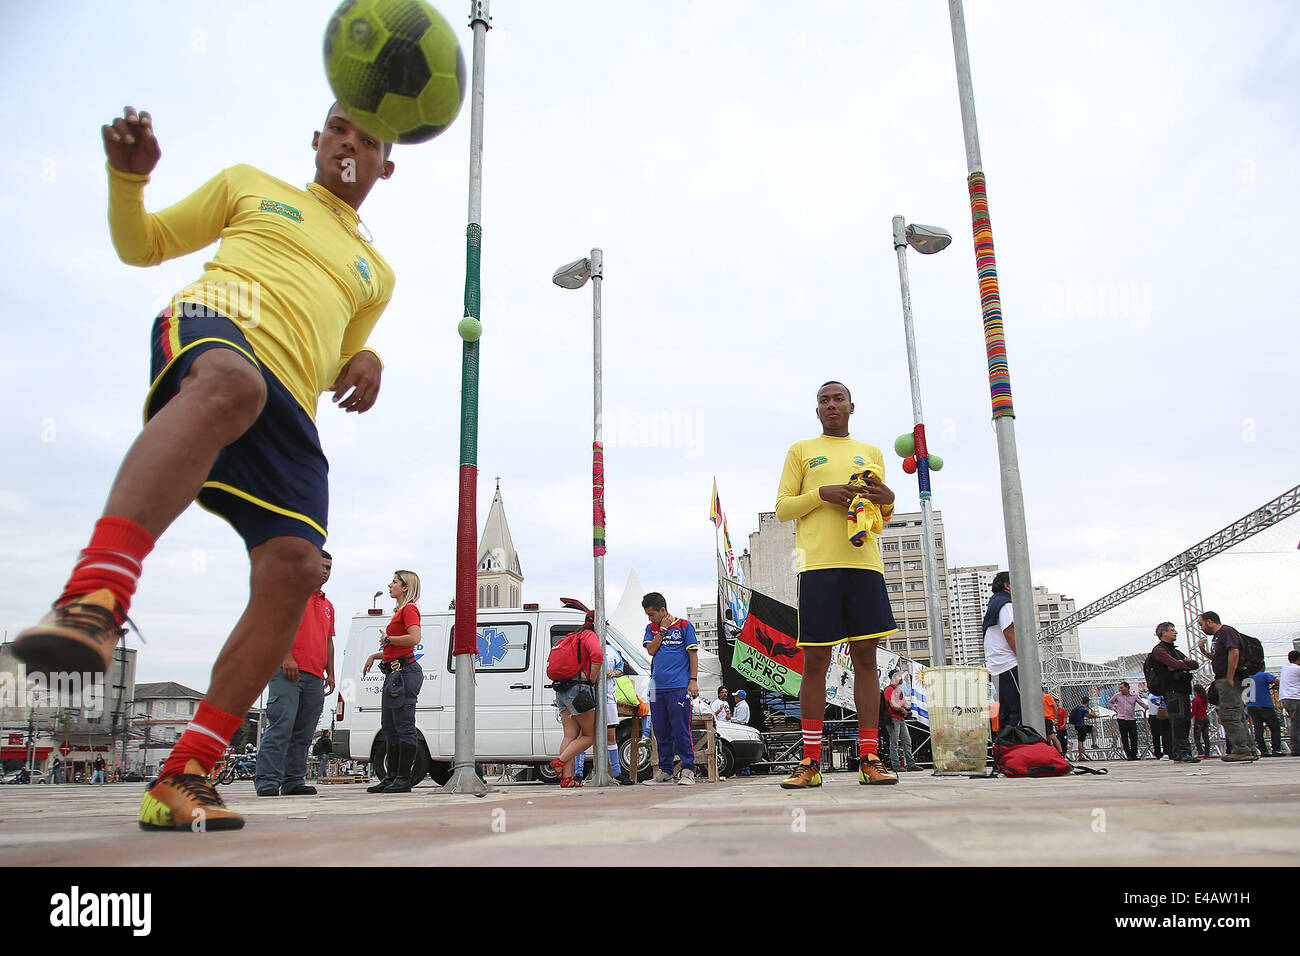 Sao Paulo, Brazil. 7th July, 2014. An athlete of Colombia controls the ball during the Street Football World Cup in Sao Paulo, Brazil, on July 7, 2014. This sports event attracted around 300 youngsters from 20 countries and regions all over the world. Differing from the conventional football match, the Street Football World Cup allowed athletes of different sexes to play together and there are no arbitrators. © Rahel Patrasso/Xinhua/Alamy Live News Stock Photo